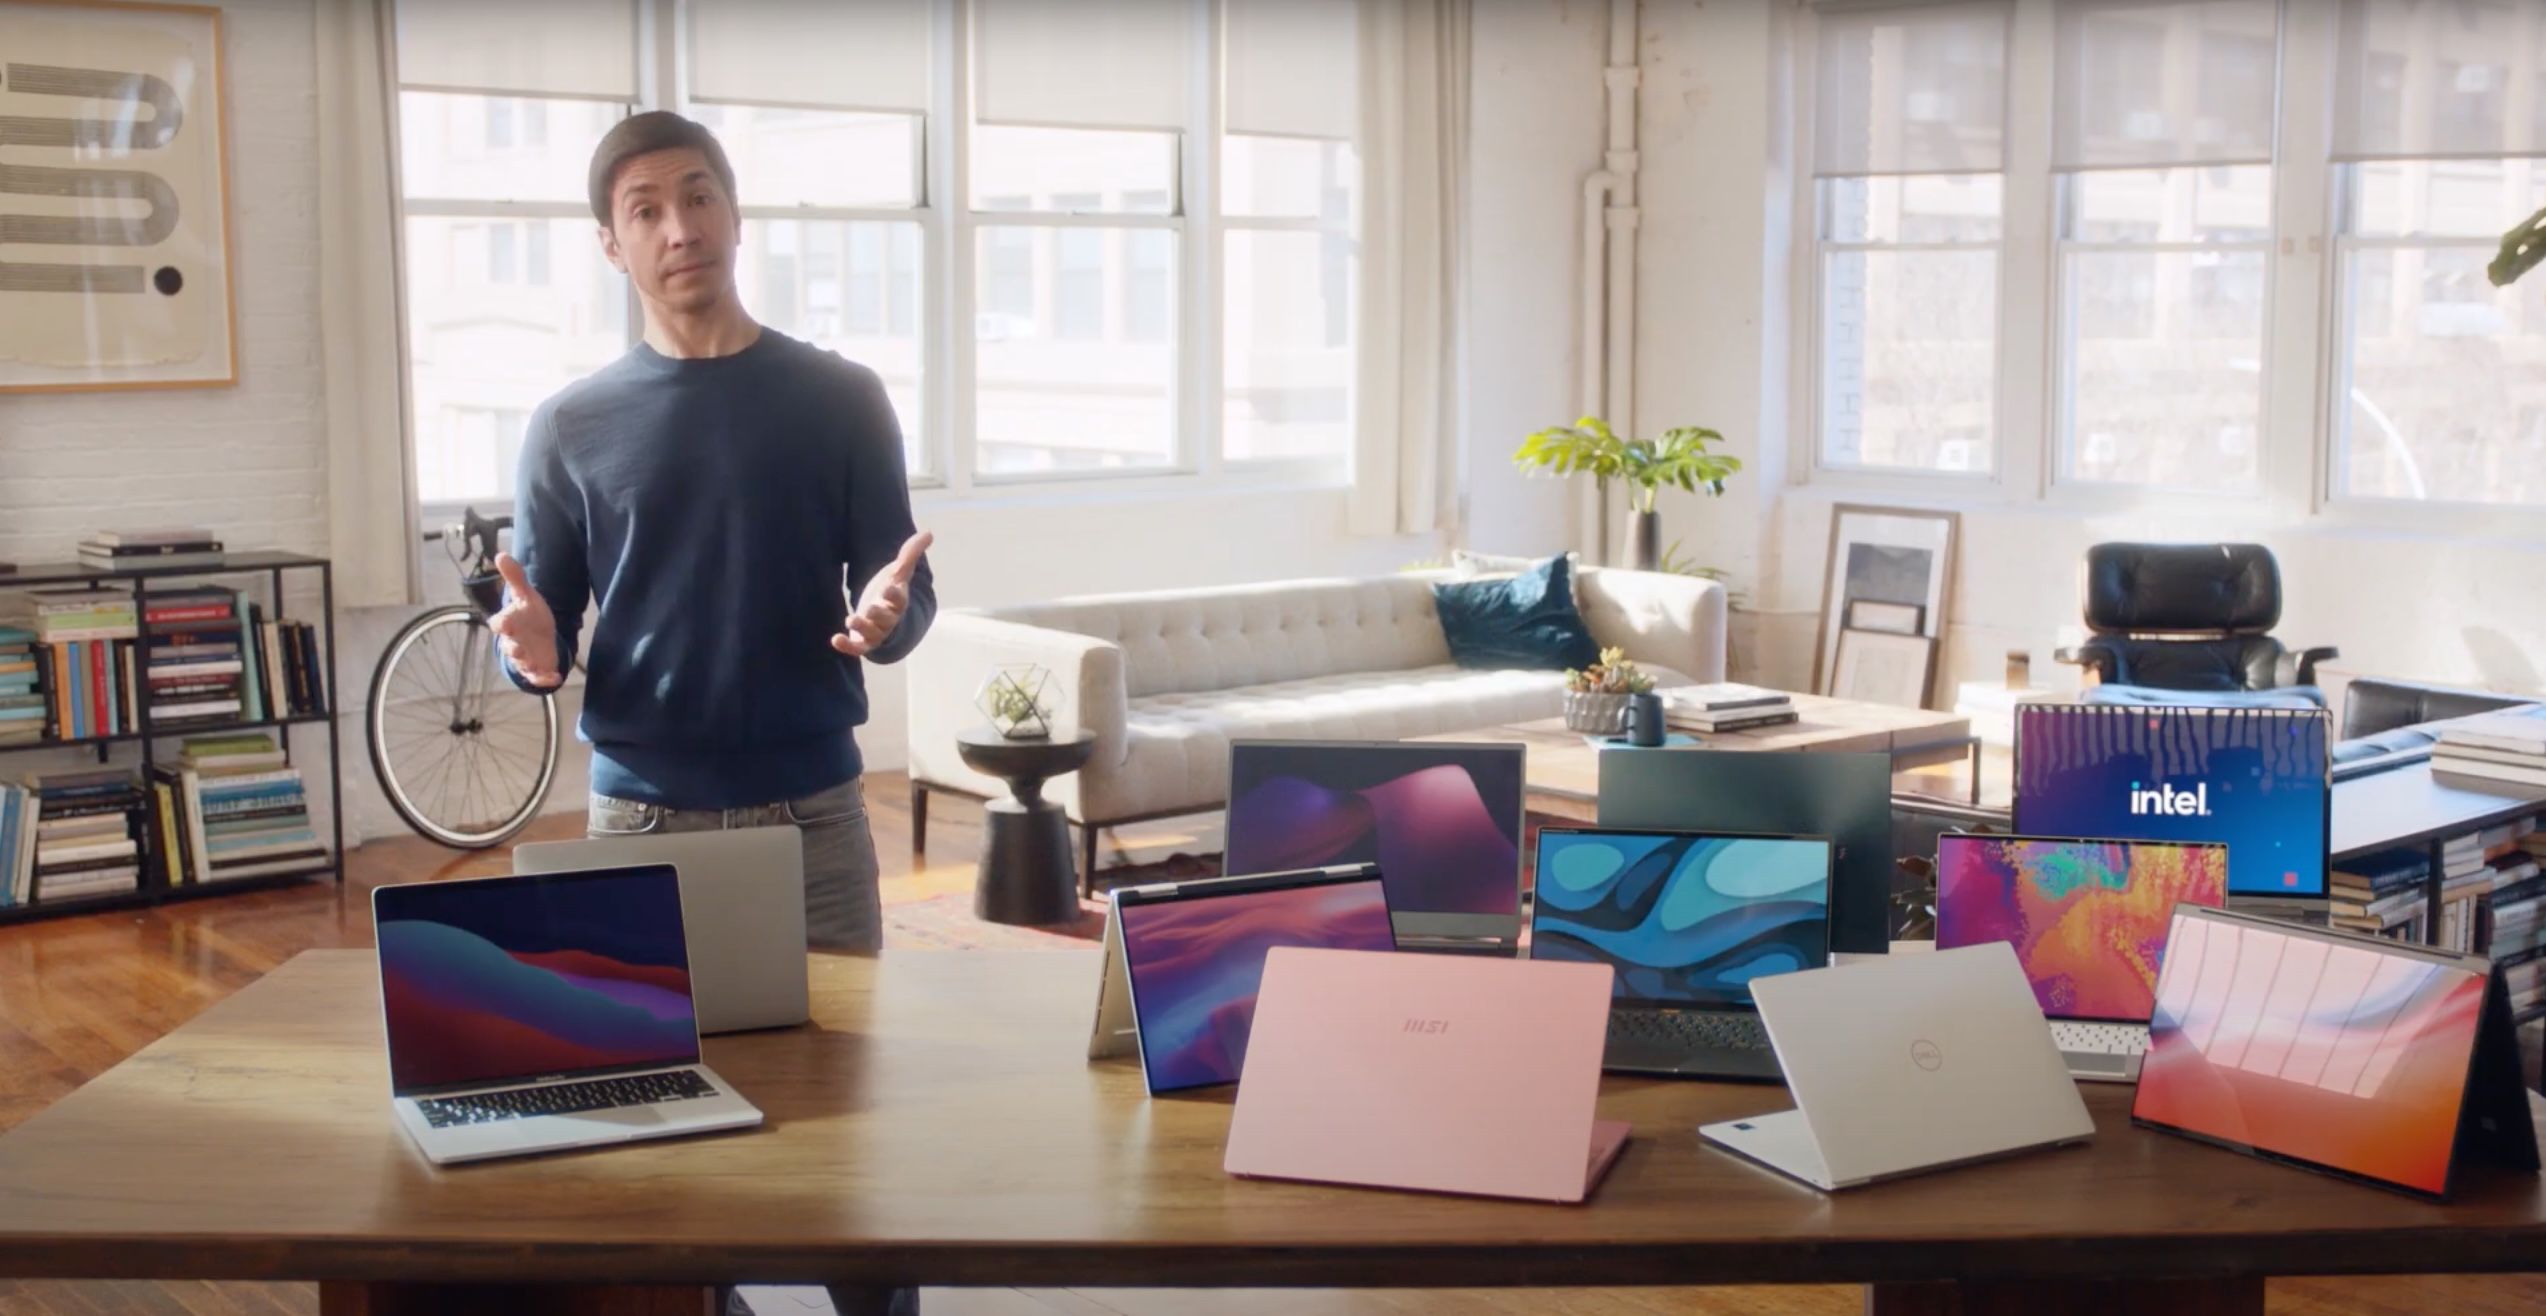 Former “I’m a Mac” actor Justin Long casts the shadow of the Apple Silicon M1 in the new Intel advertising campaign